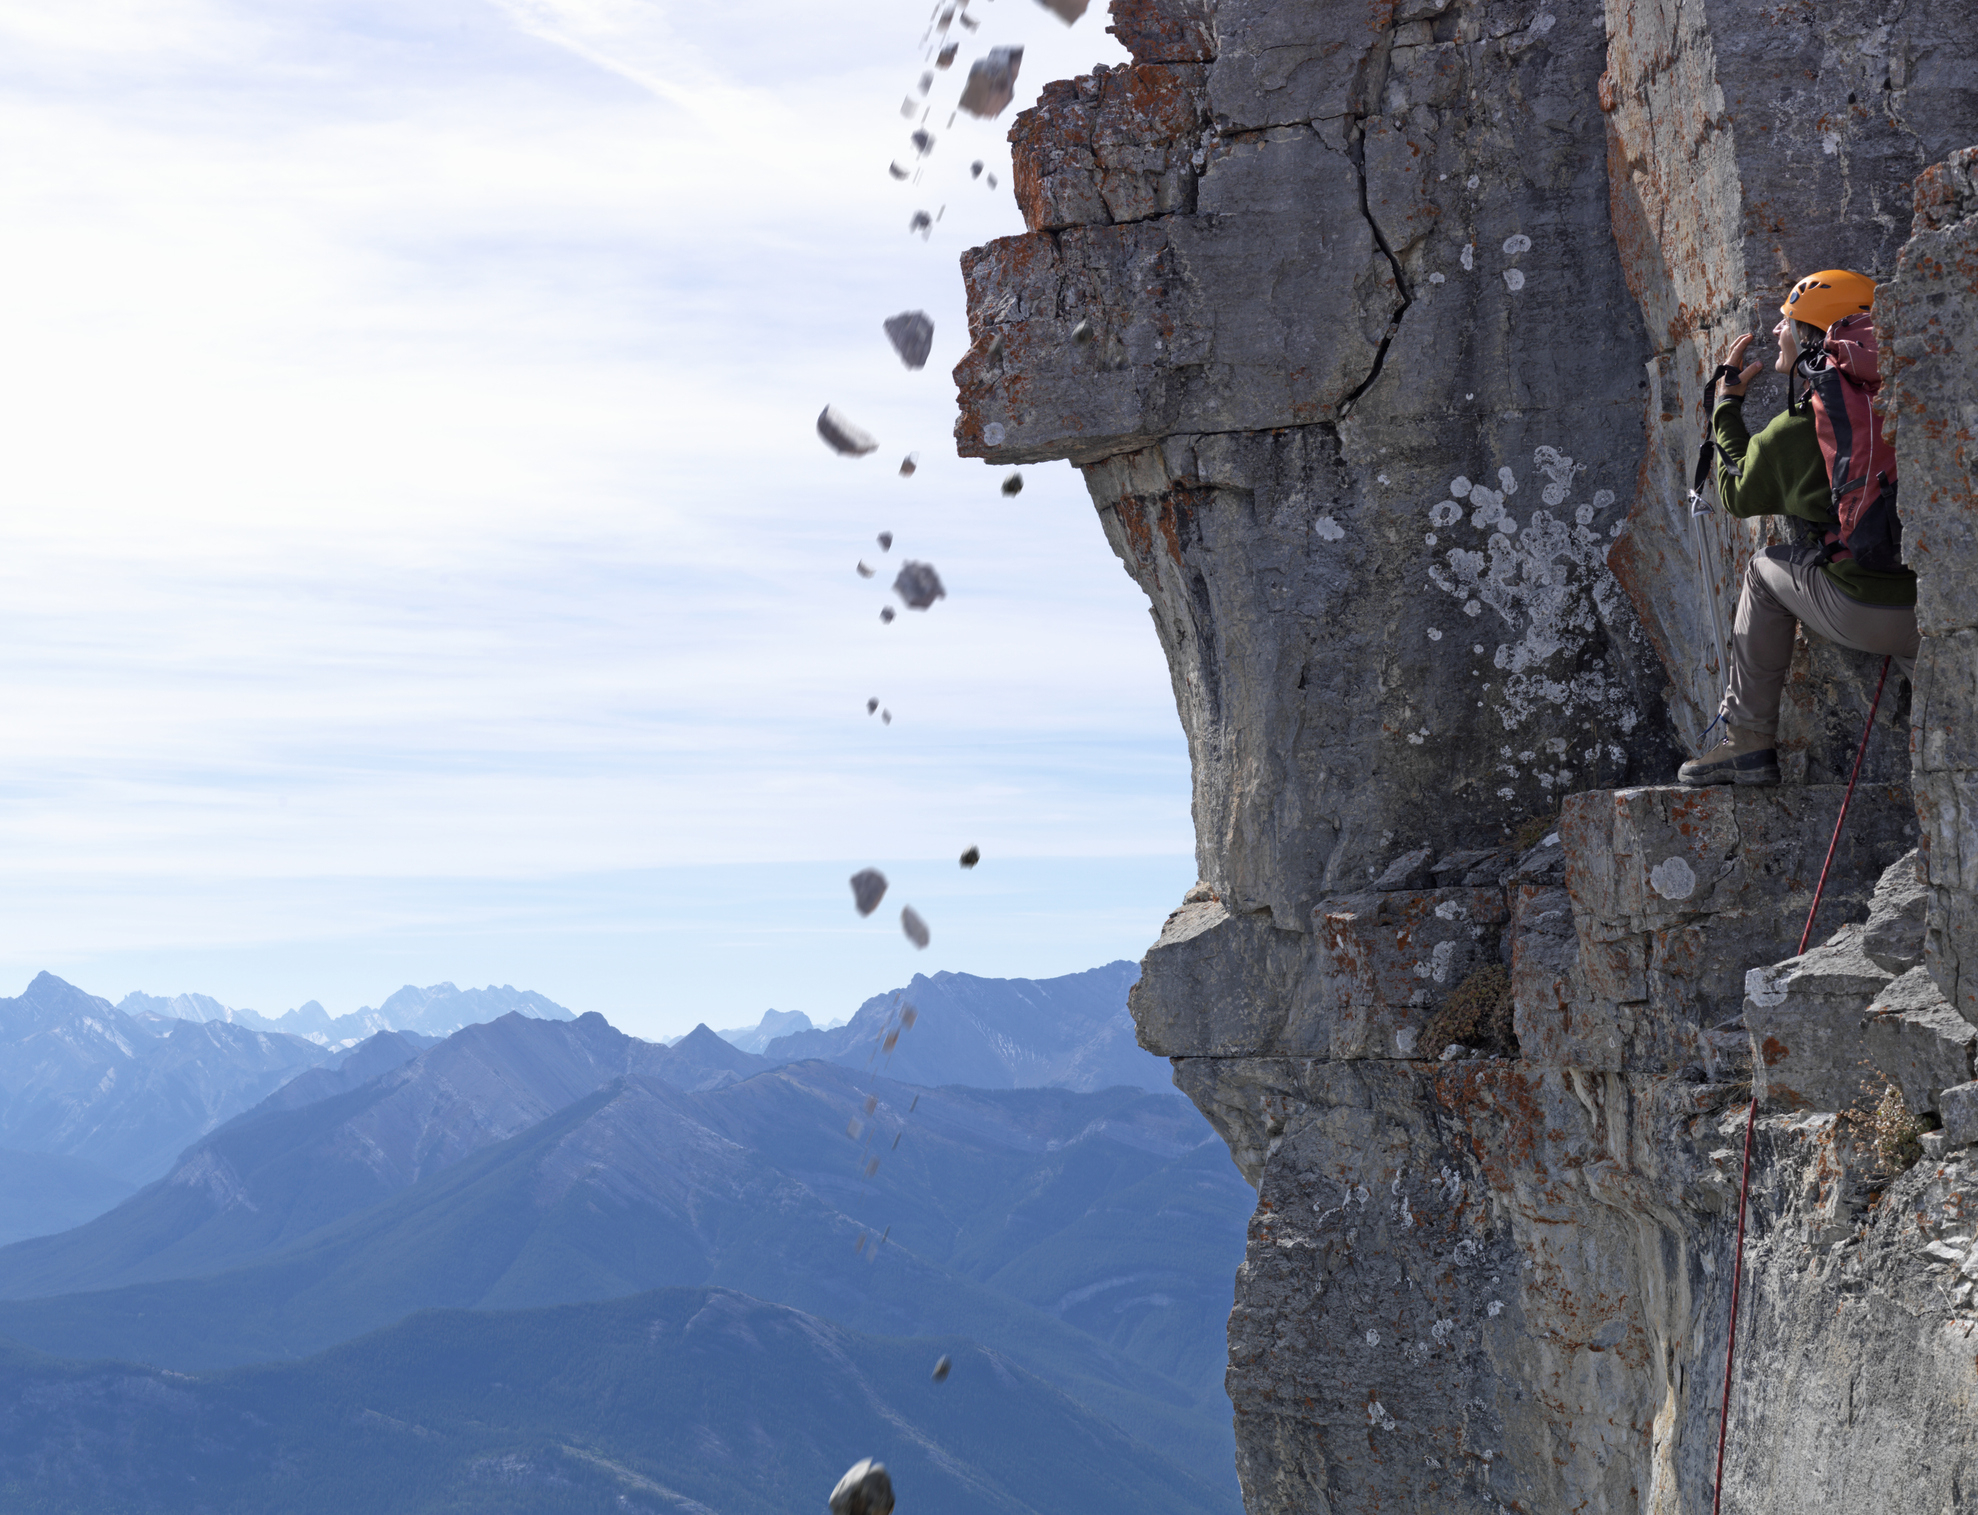 Climber secured with ropes on a mountain face, rocks falling beside them, expansive view of peaks in the background